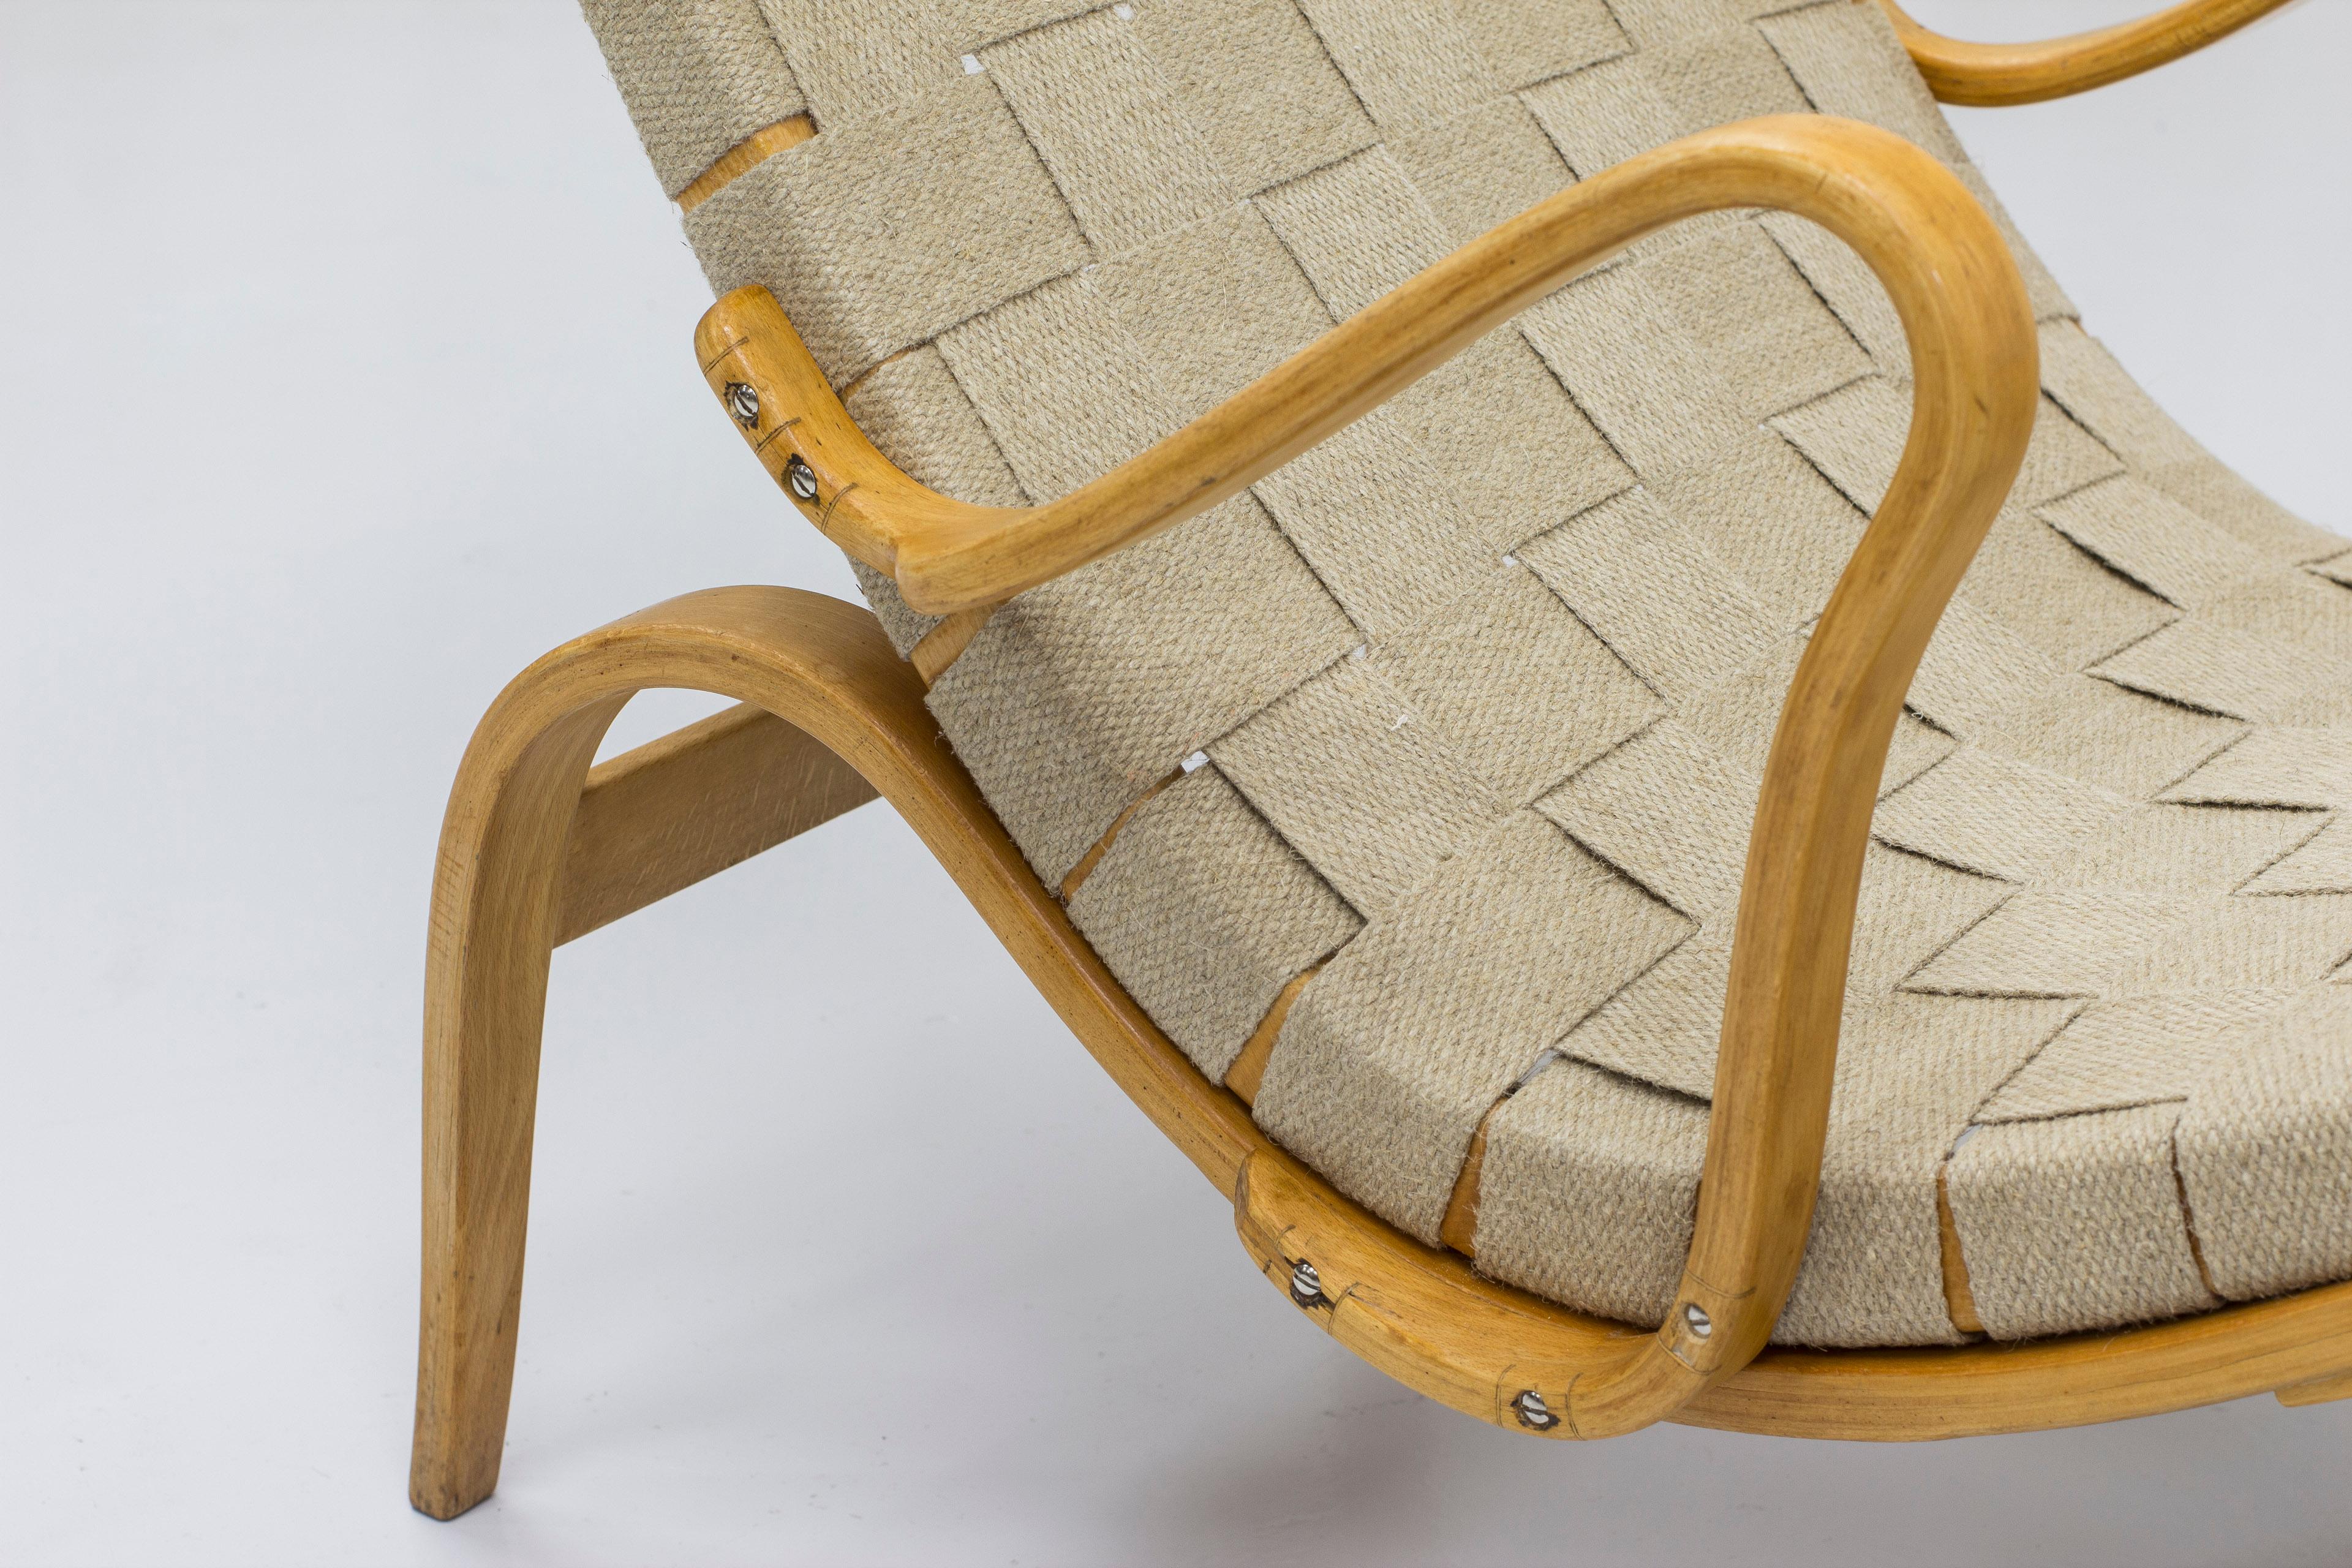 Model 36 chaise longues by Bruno Mathsson for Firma Karl Mathsson 1940s Sweden For Sale 4